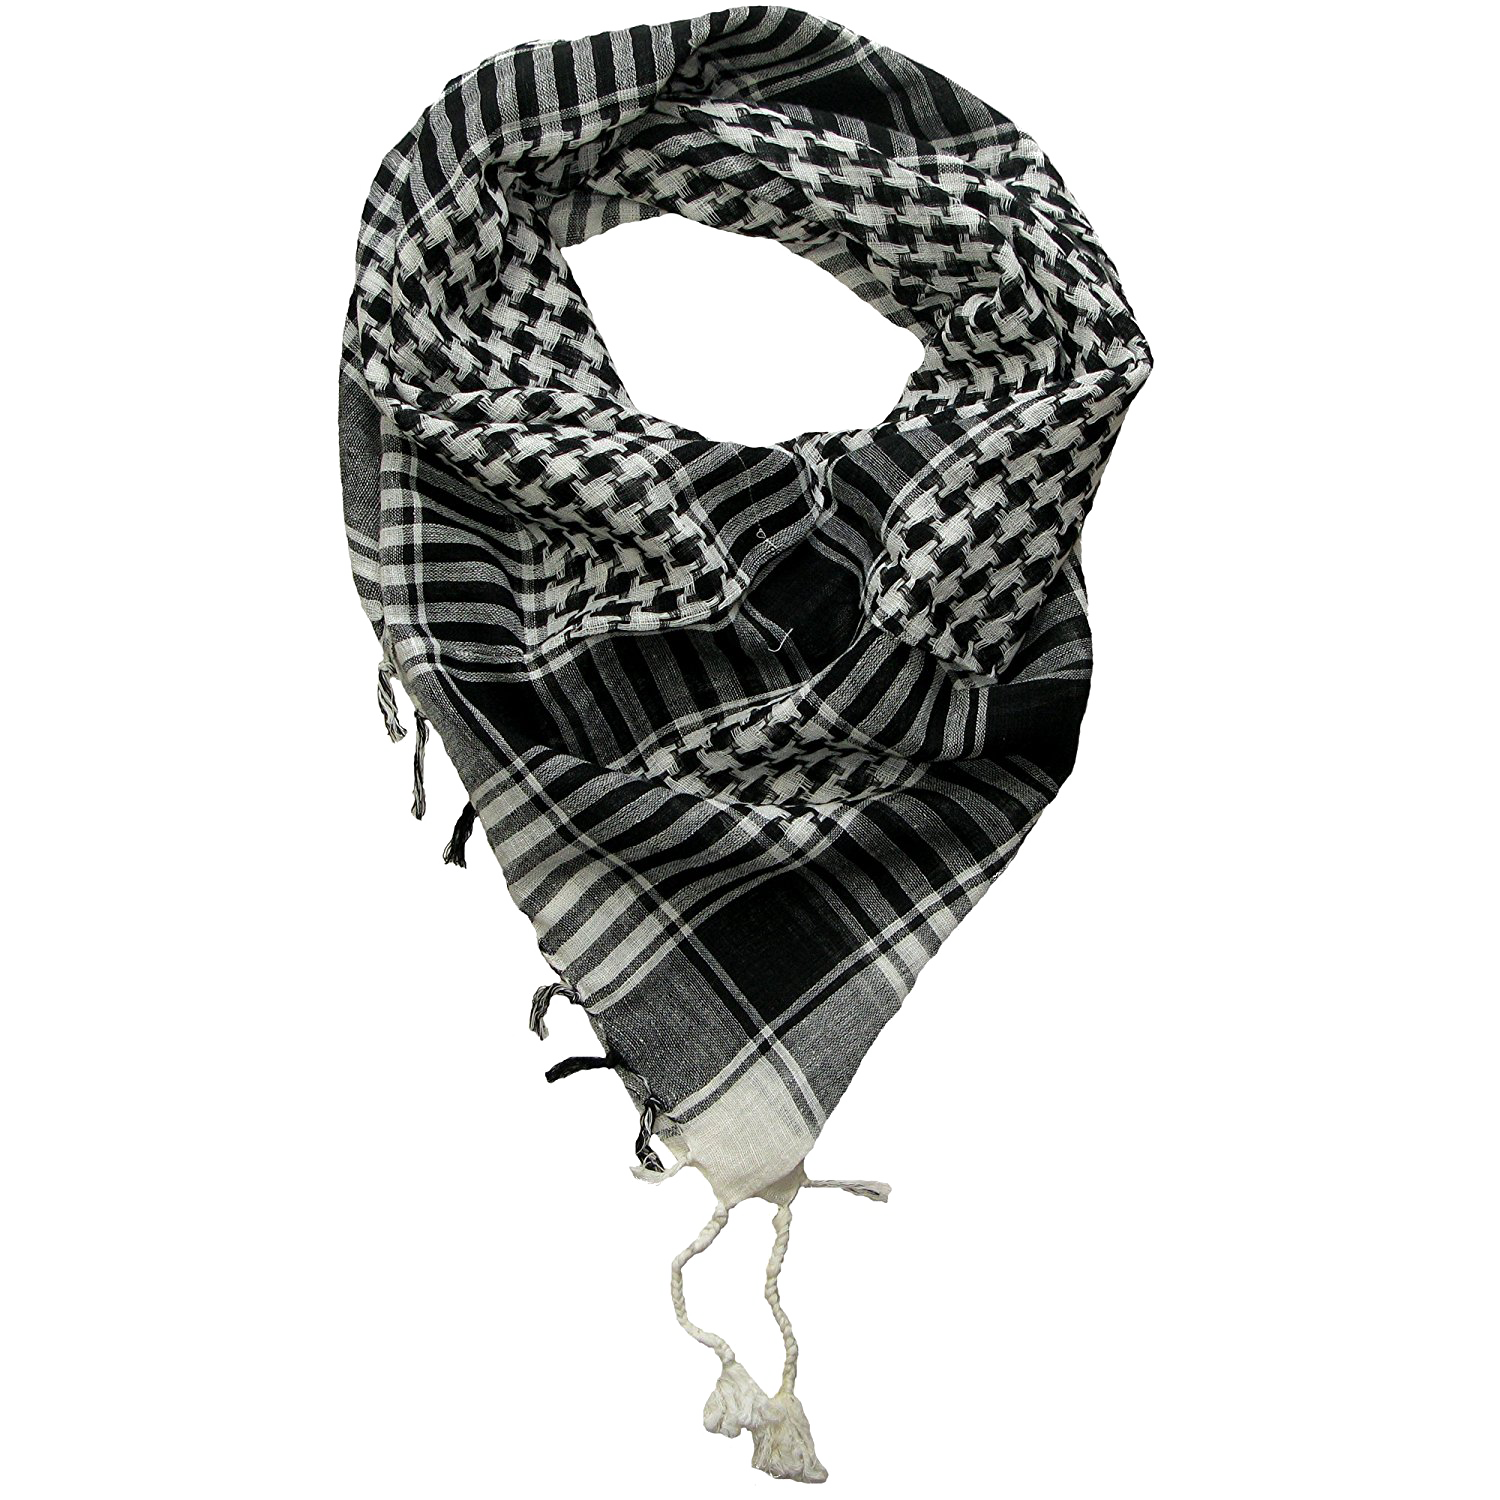 Man Scarf PNG High-Quality Image